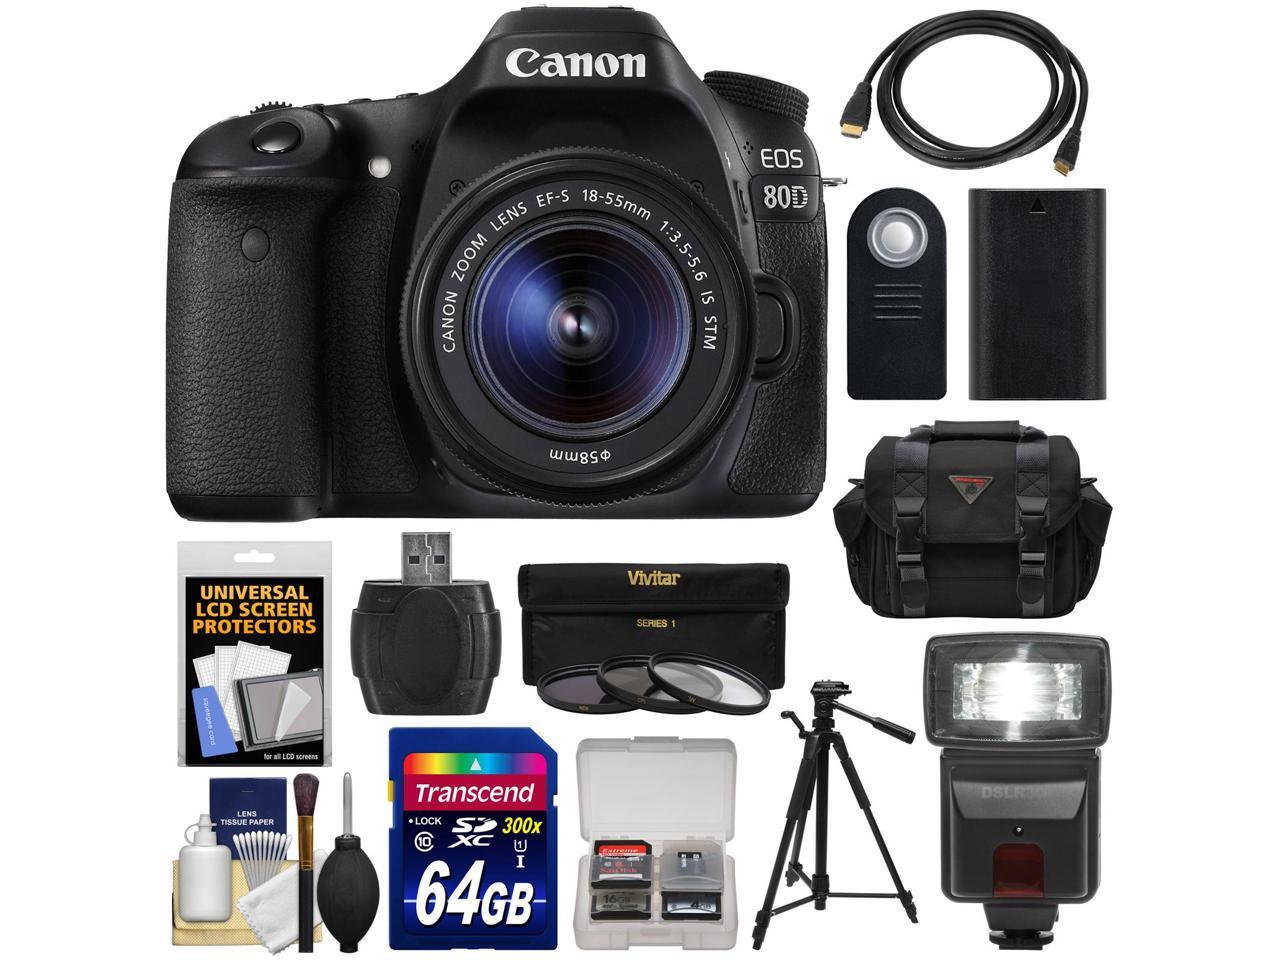 Canon EOS 80D Wi-Fi Digital SLR Camera & EF-S 18-55mm IS STM Lens with 64GB Card + Battery + Case + Flash + Tripod + 3 Filters + Kit